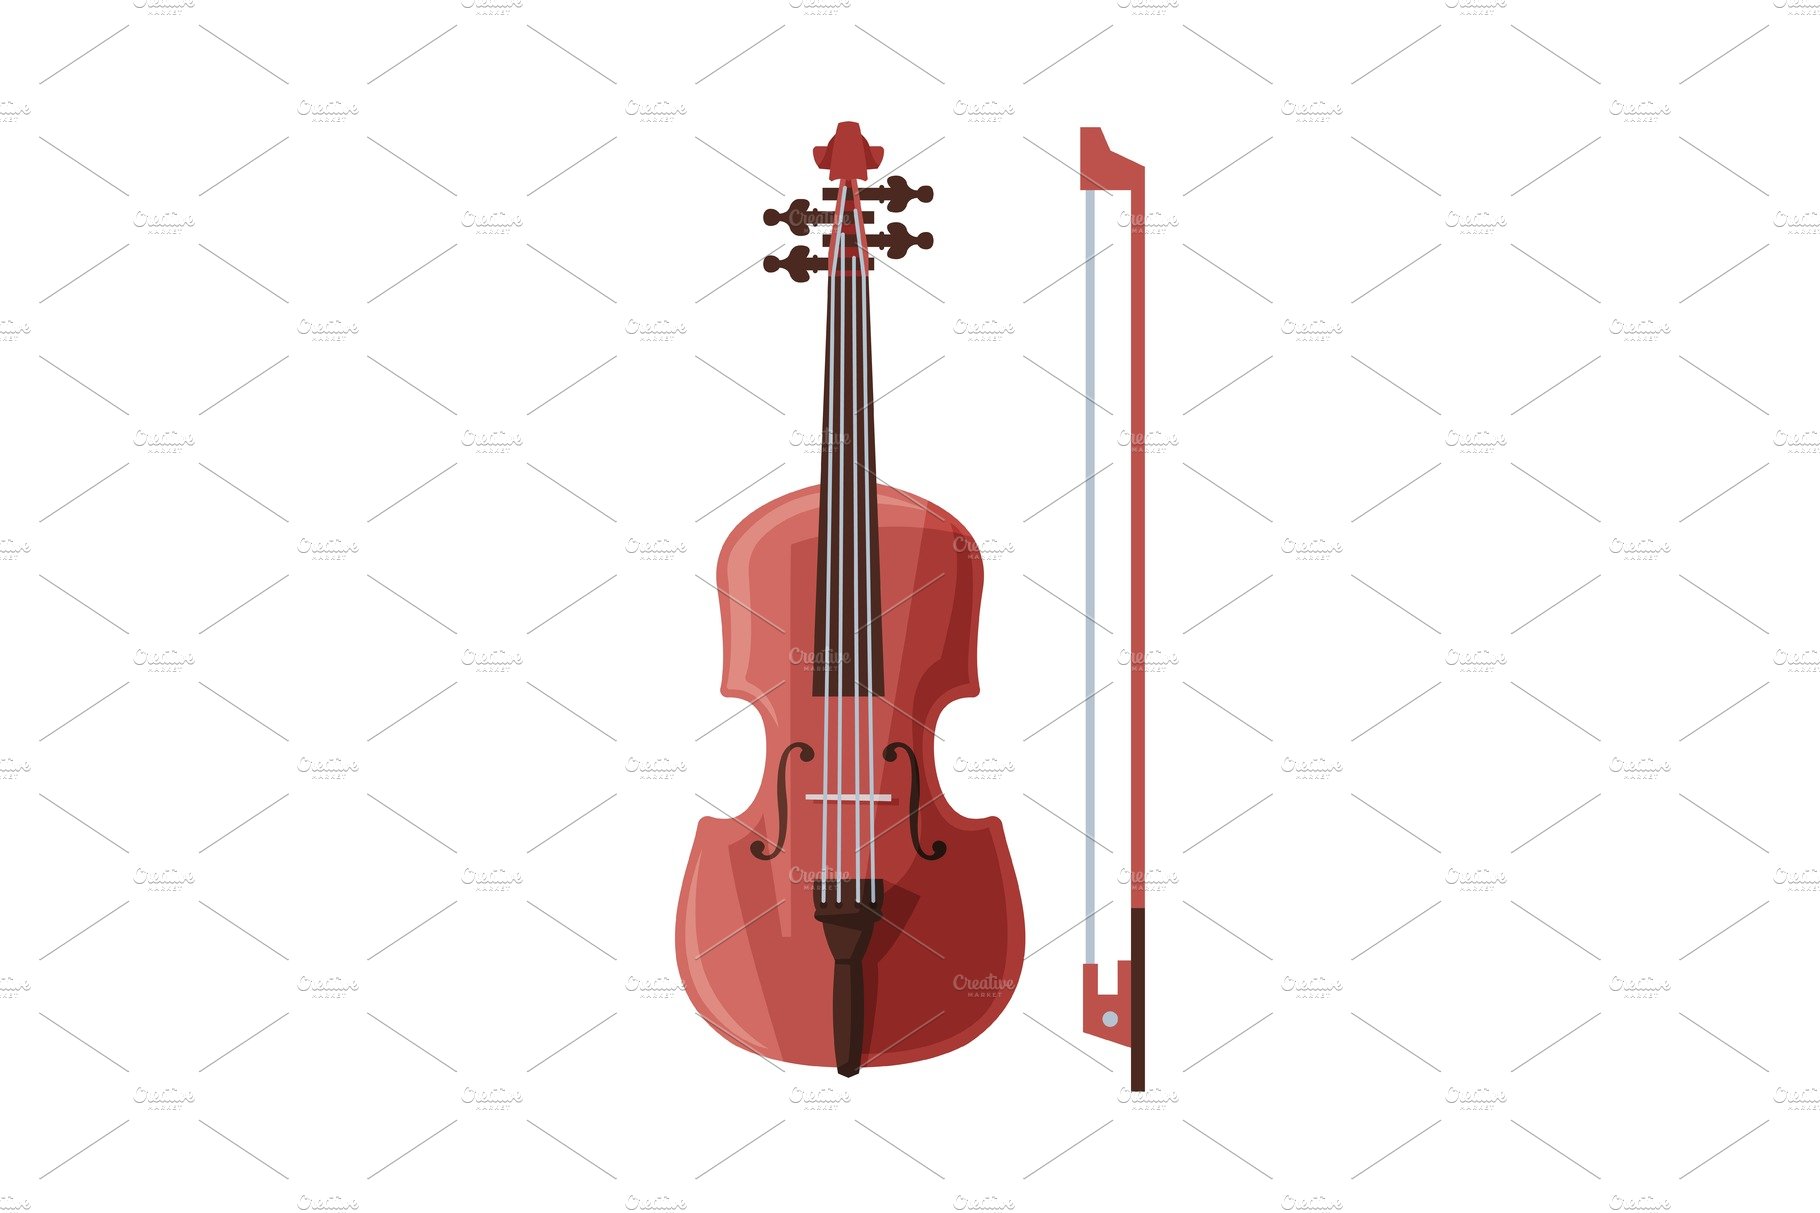 Violin and Bow Classical String cover image.